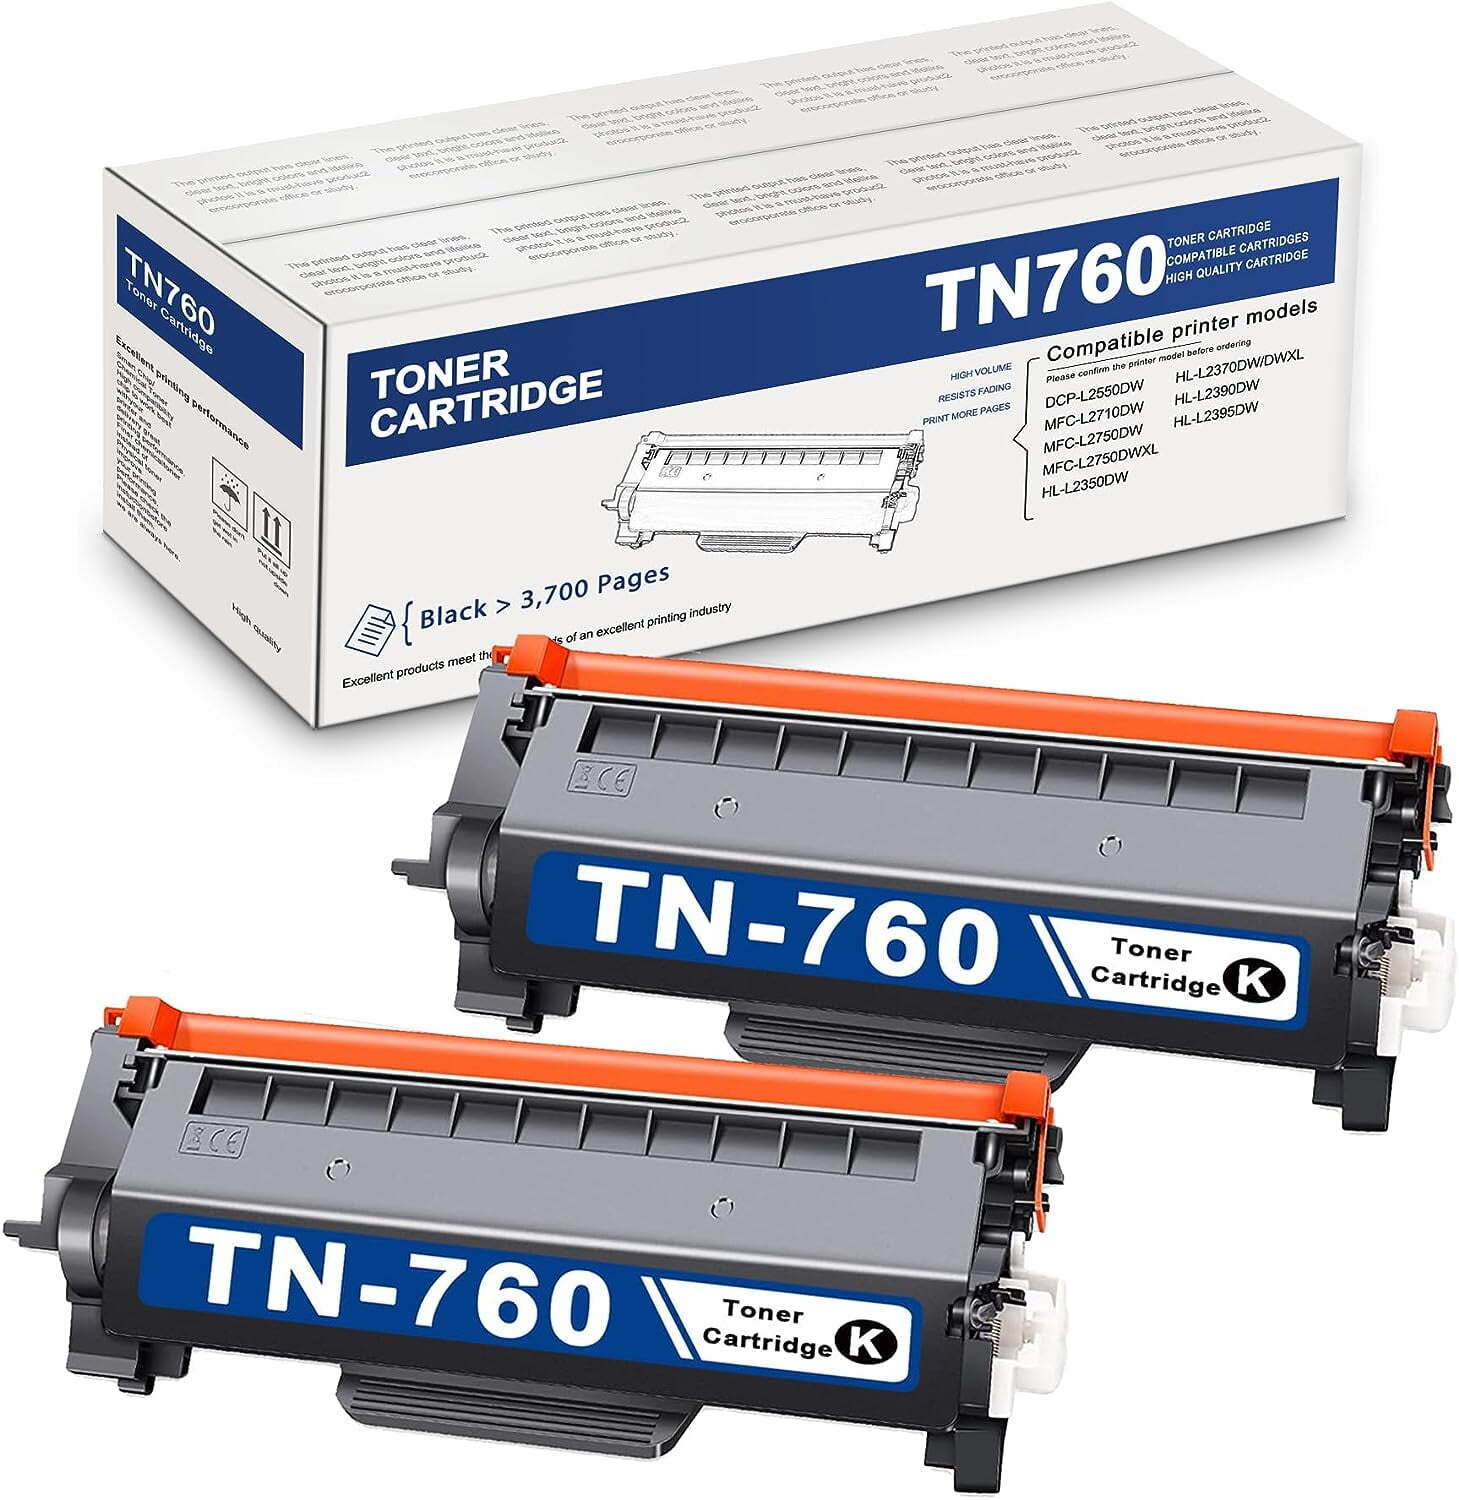 TN760 2Black Toner Cartridge Replacement for Brother TN760 MFC-L2710DW Printer